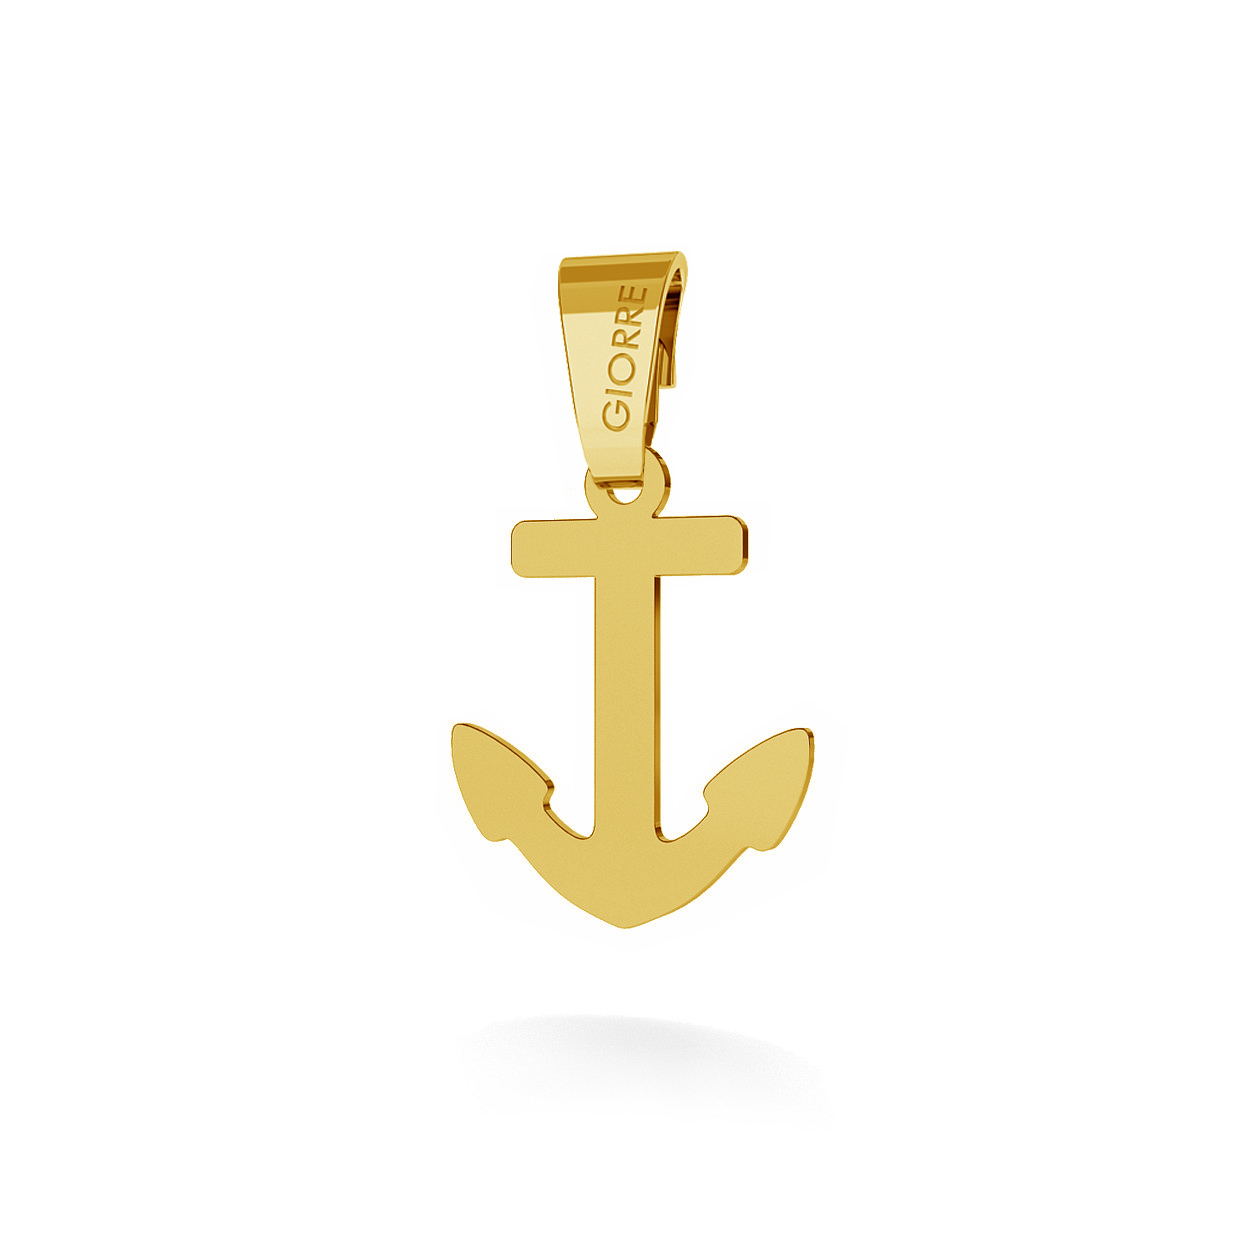 CHARM 64, ANCHOR, SILVER 925, RHODIUM OR GOLD PLATED